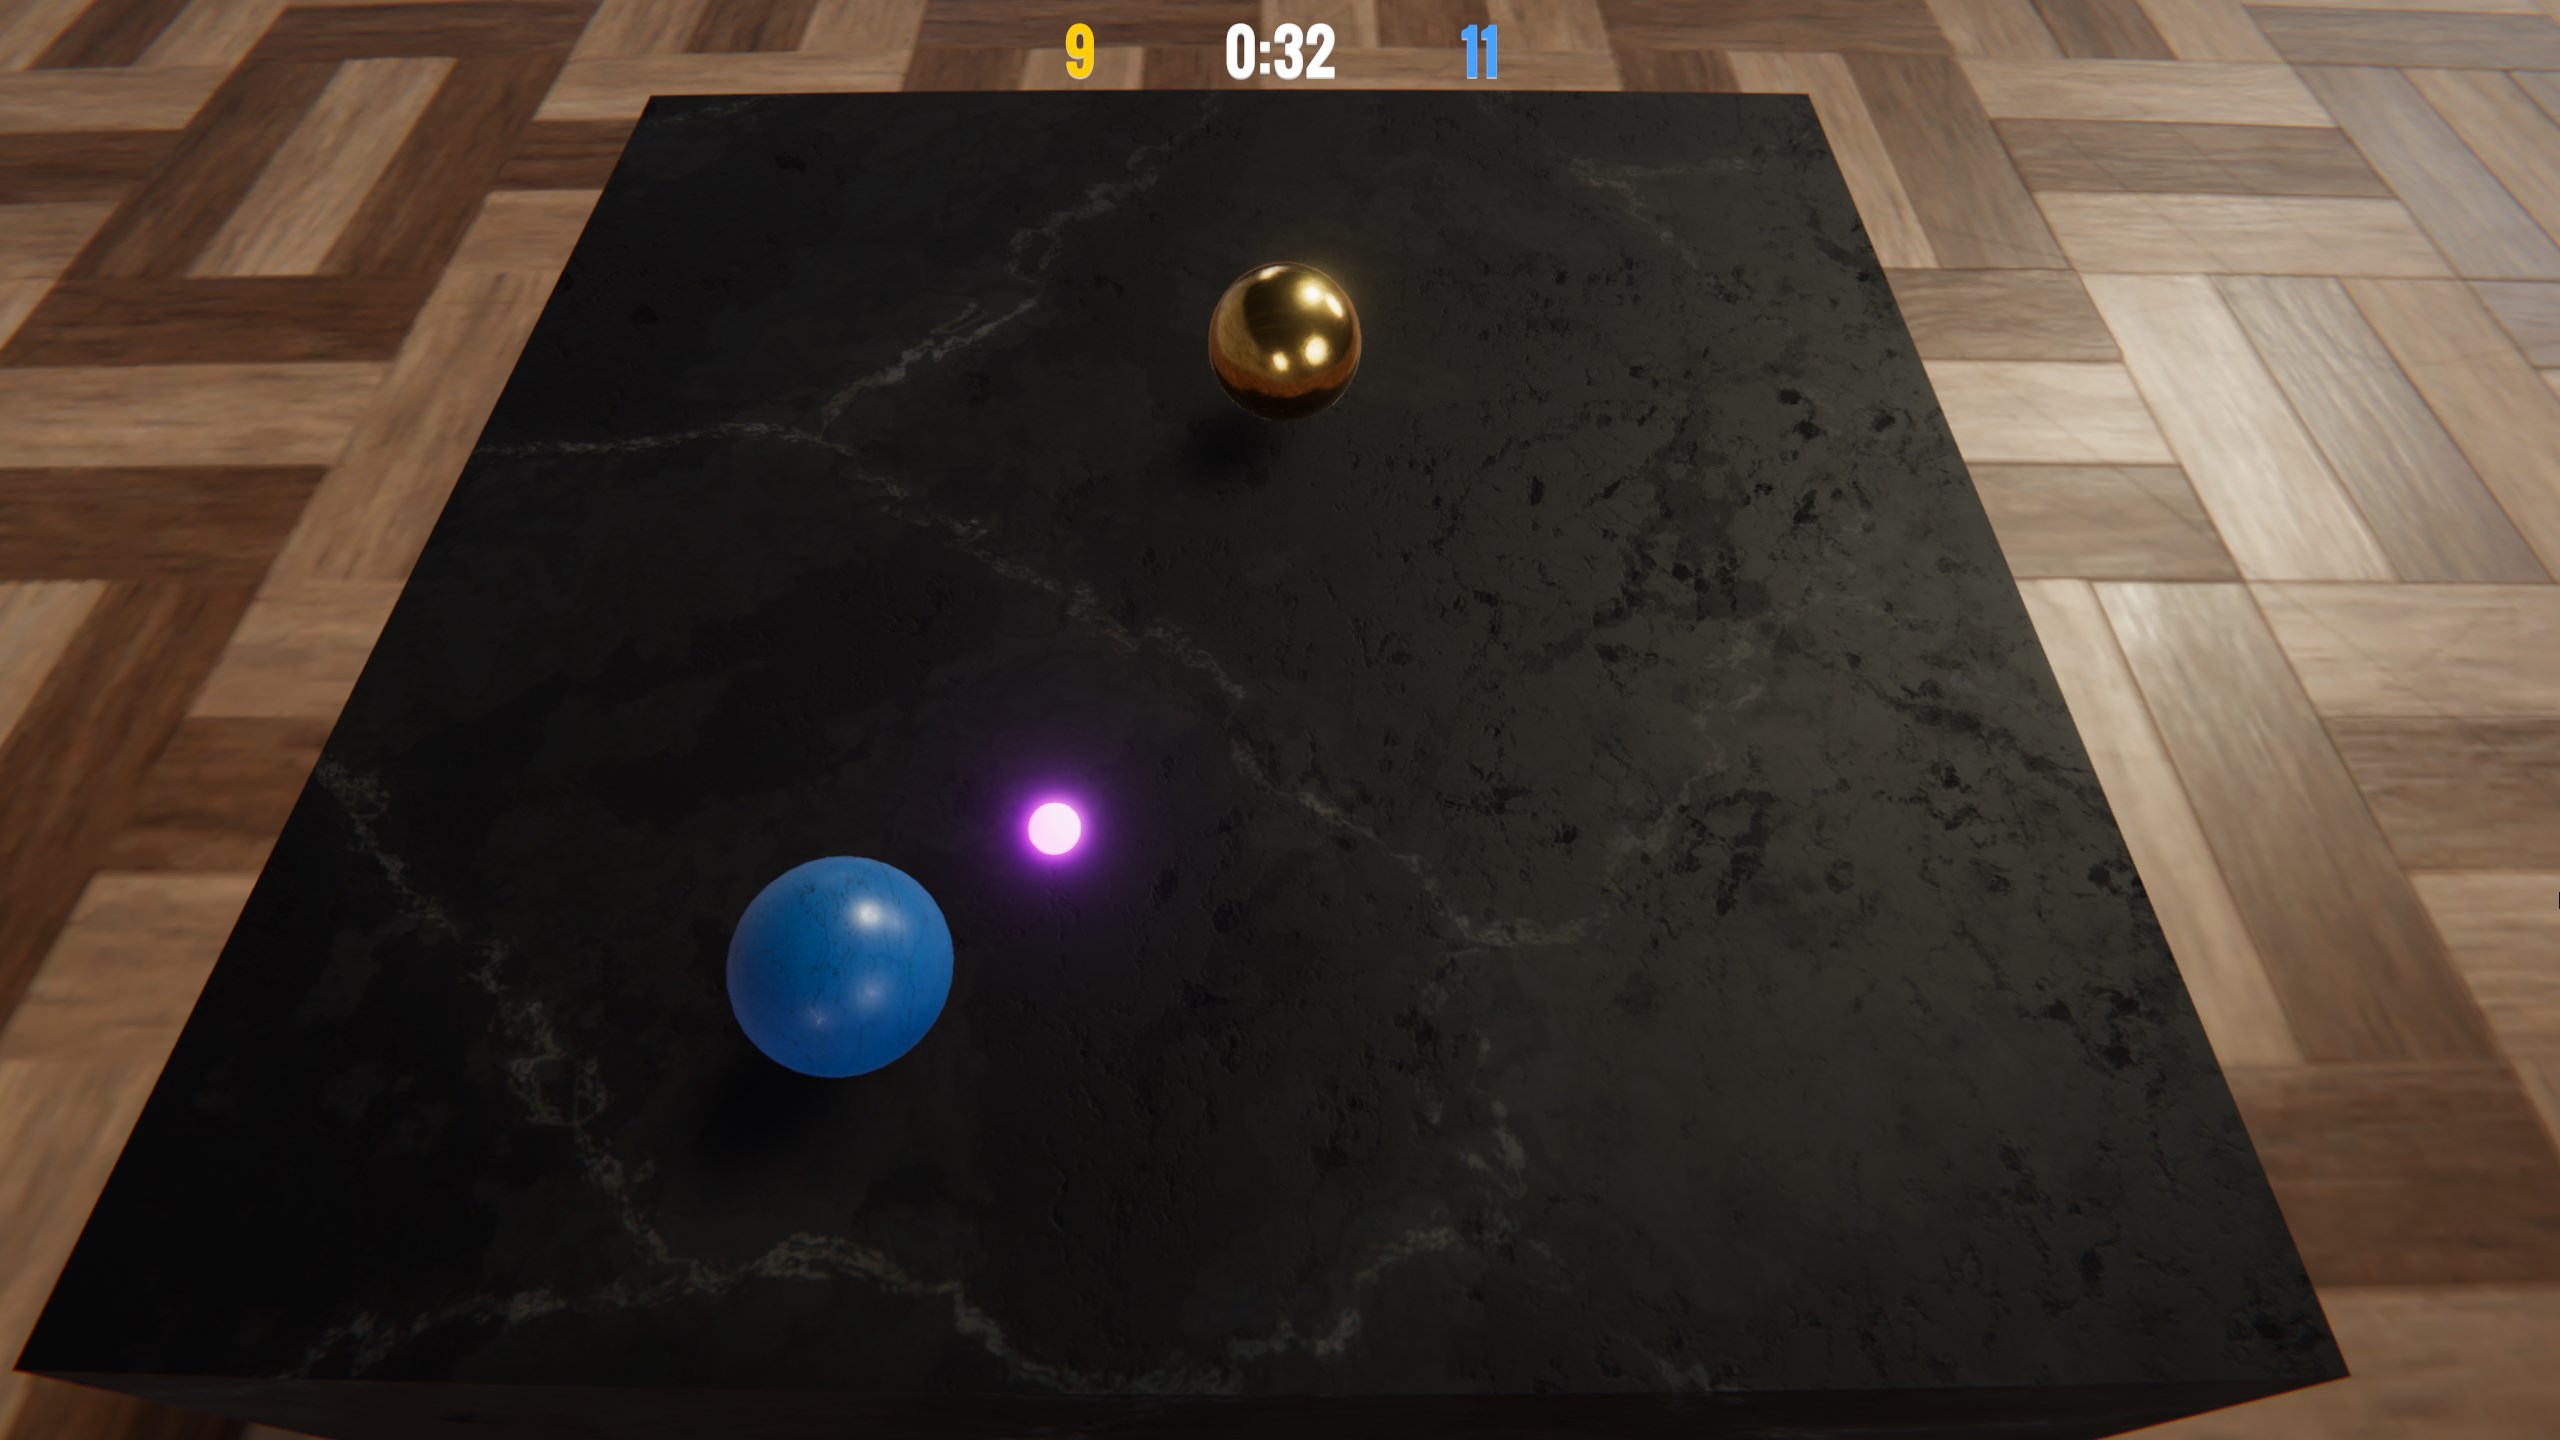 Screenshot of the game featured in the course Unity for Web Developers. It shows a marble countertop with two metal spheres rolling around on top.